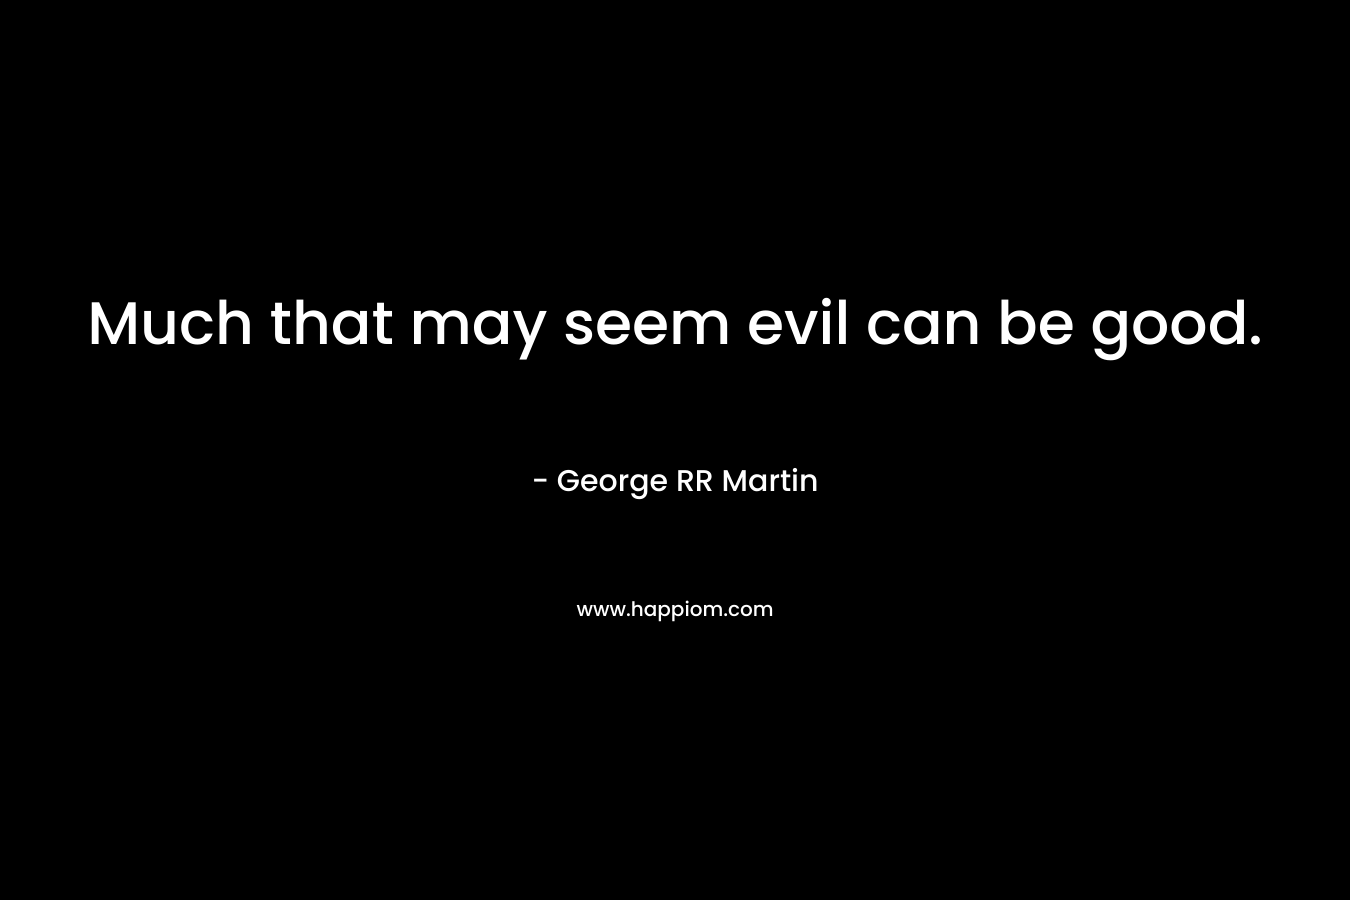 Much that may seem evil can be good.